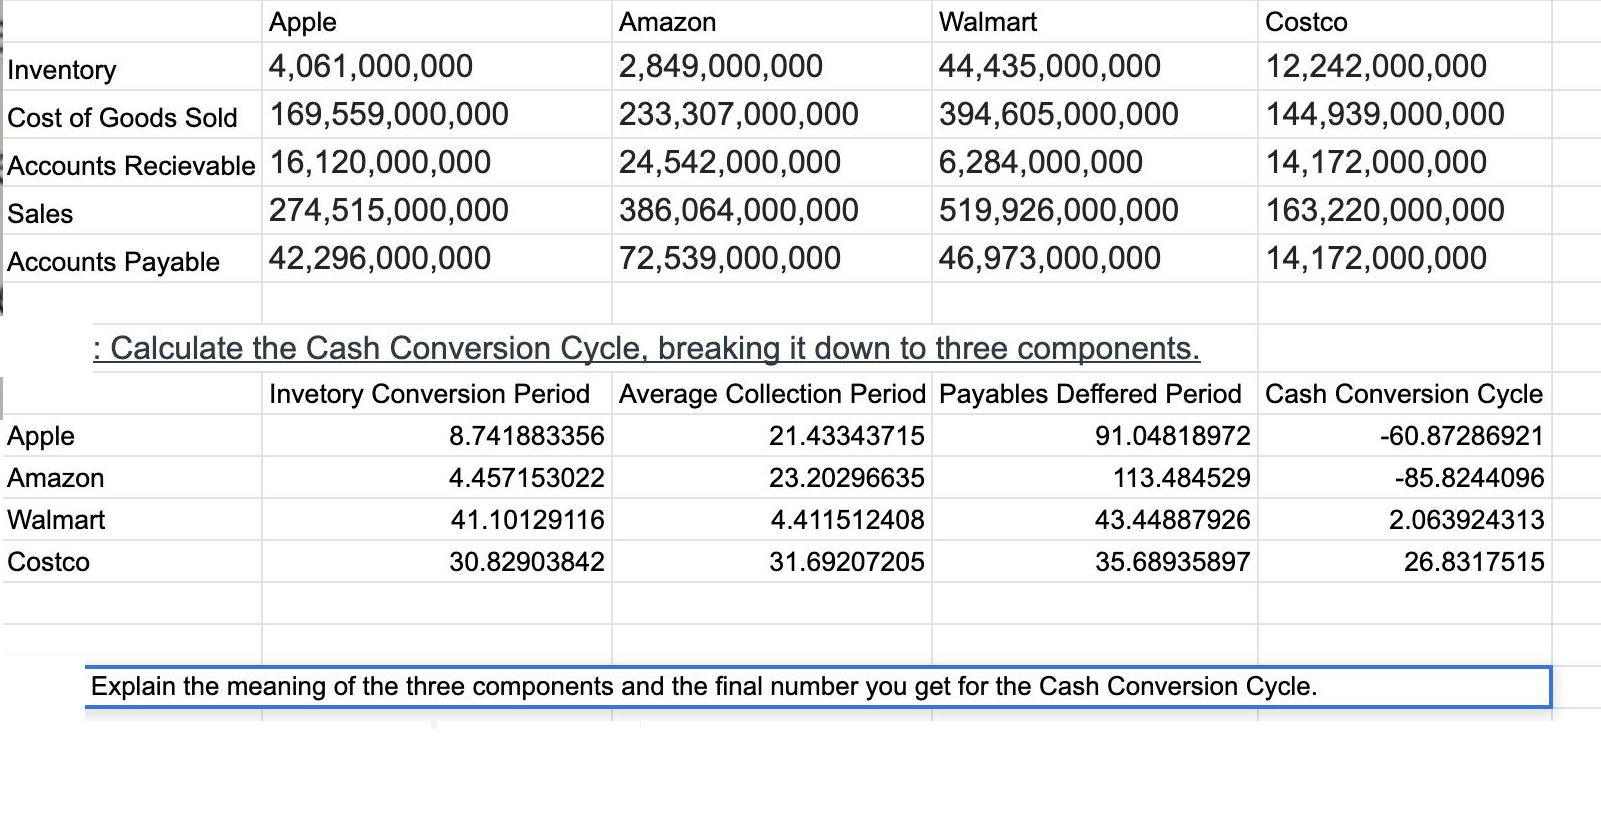 Apple Inventory 4,061,000,000 Cost of Goods Sold 169,559,000,000 Accounts Recievable 16,120,000,000 Sales